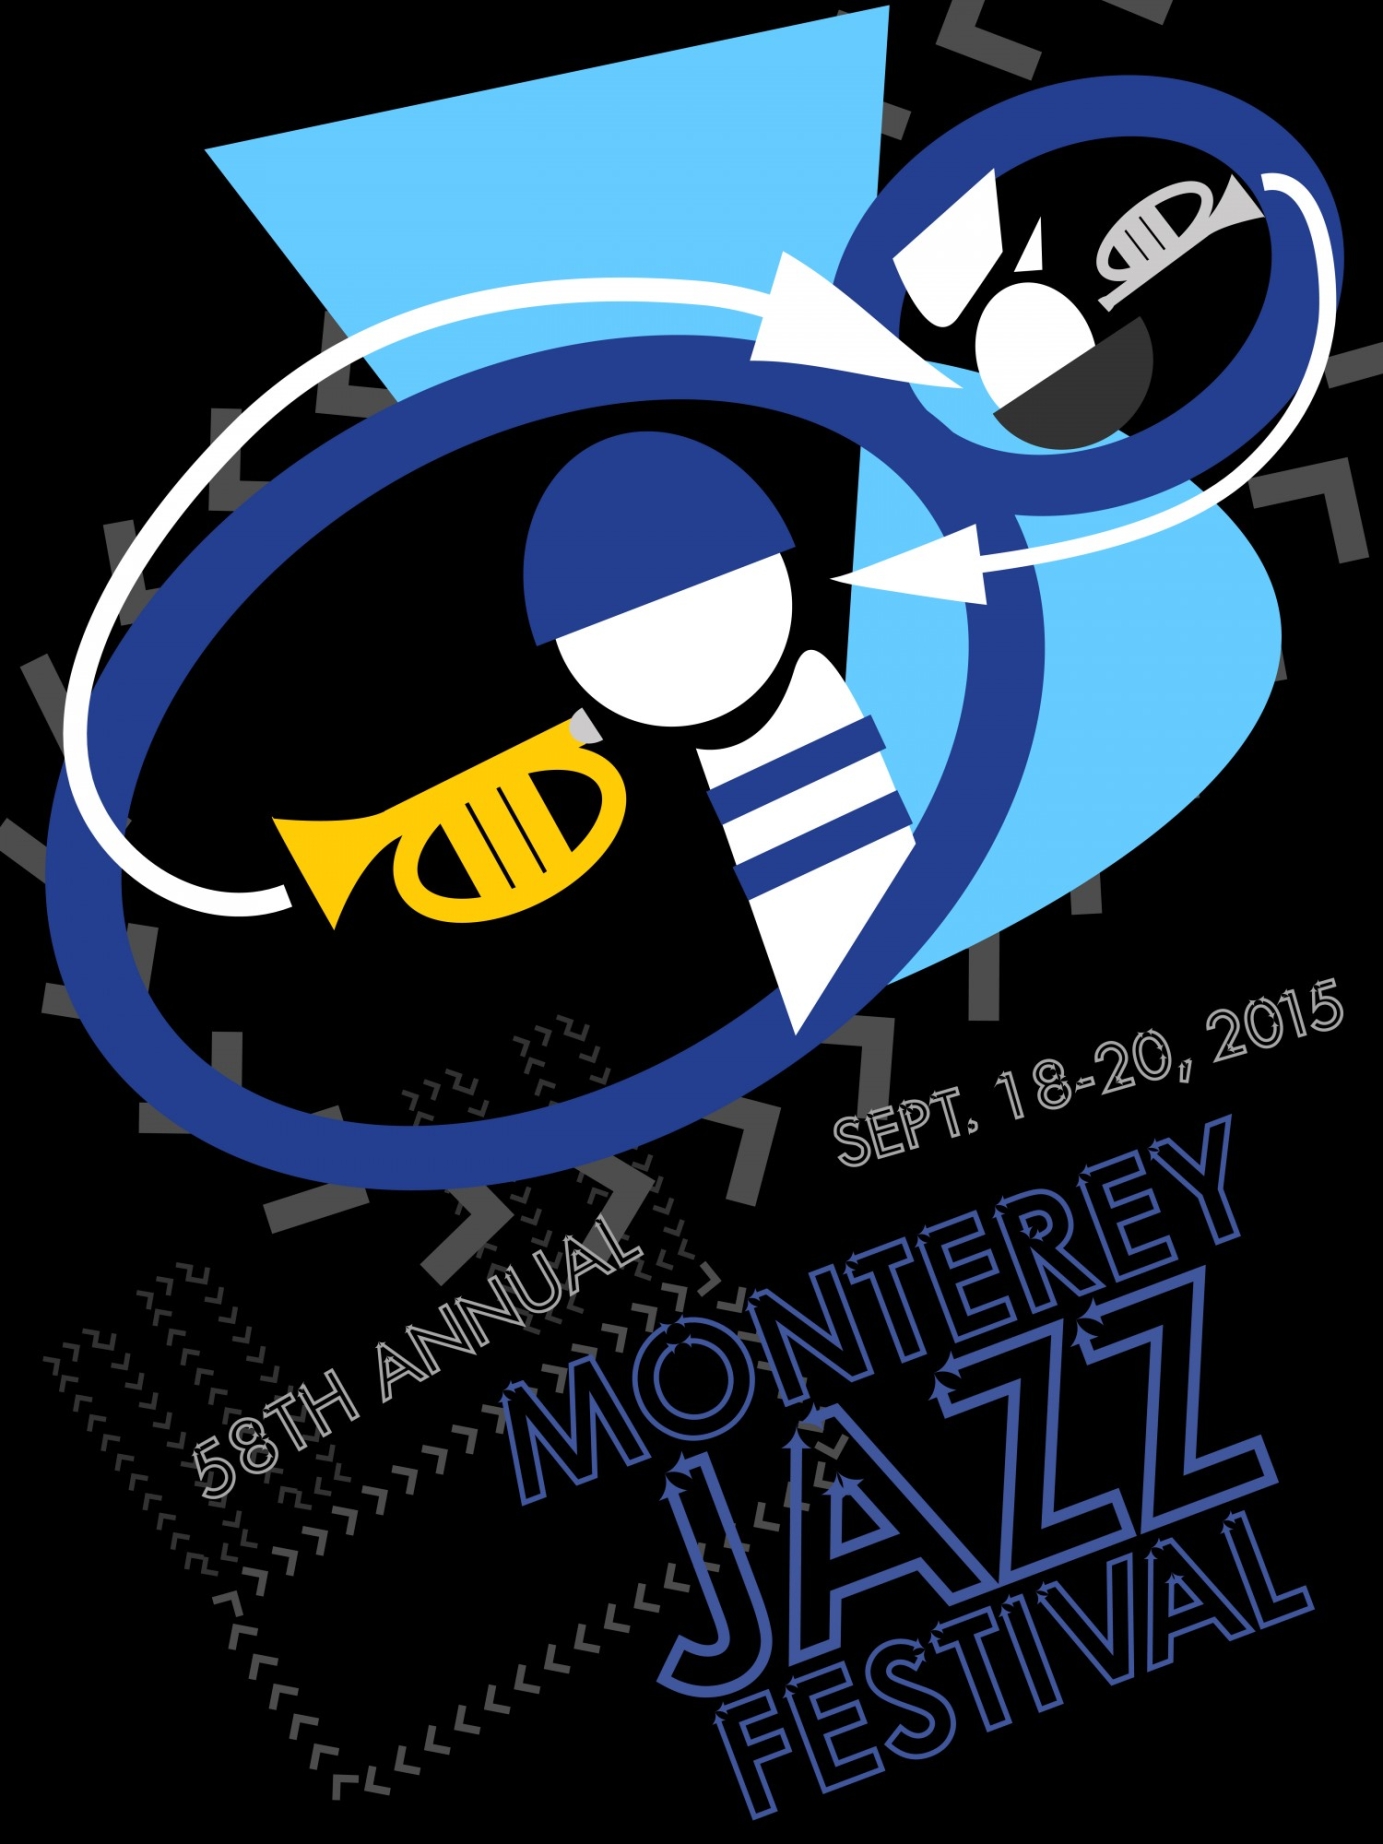 Monterey Jazz Festival 2015 Poster Submissions